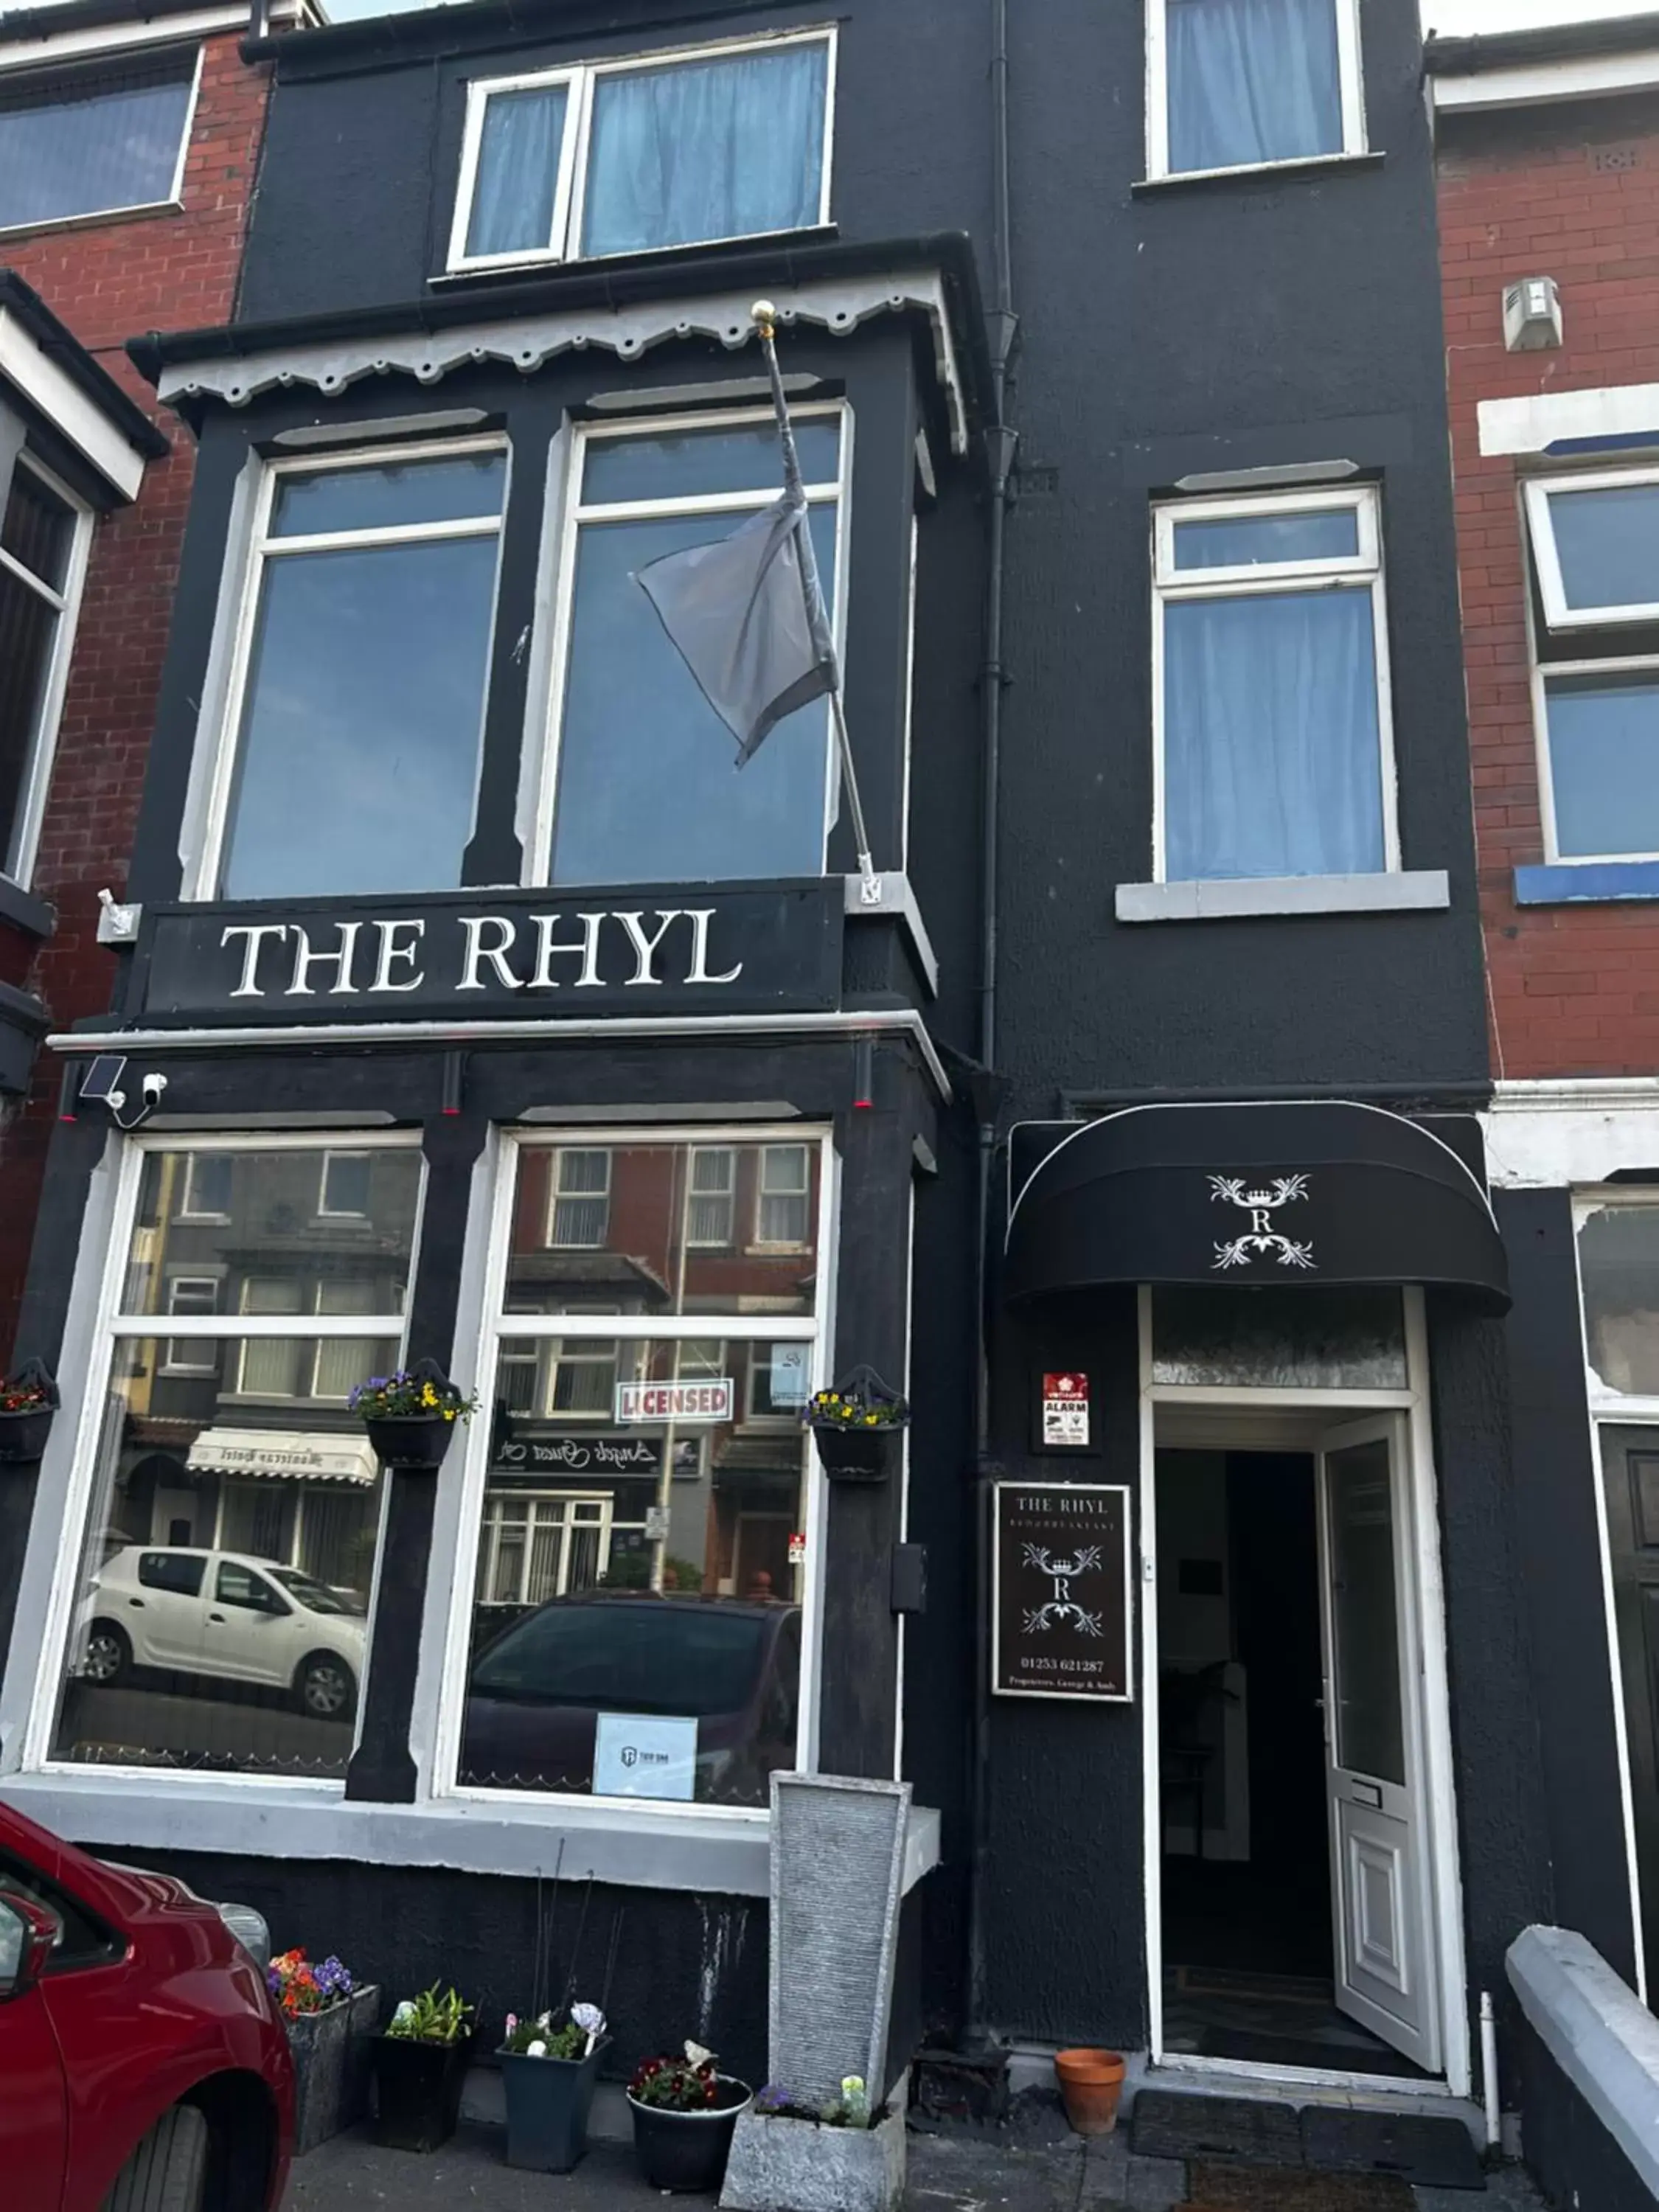 Property Building in The Rhyl. Blackpool